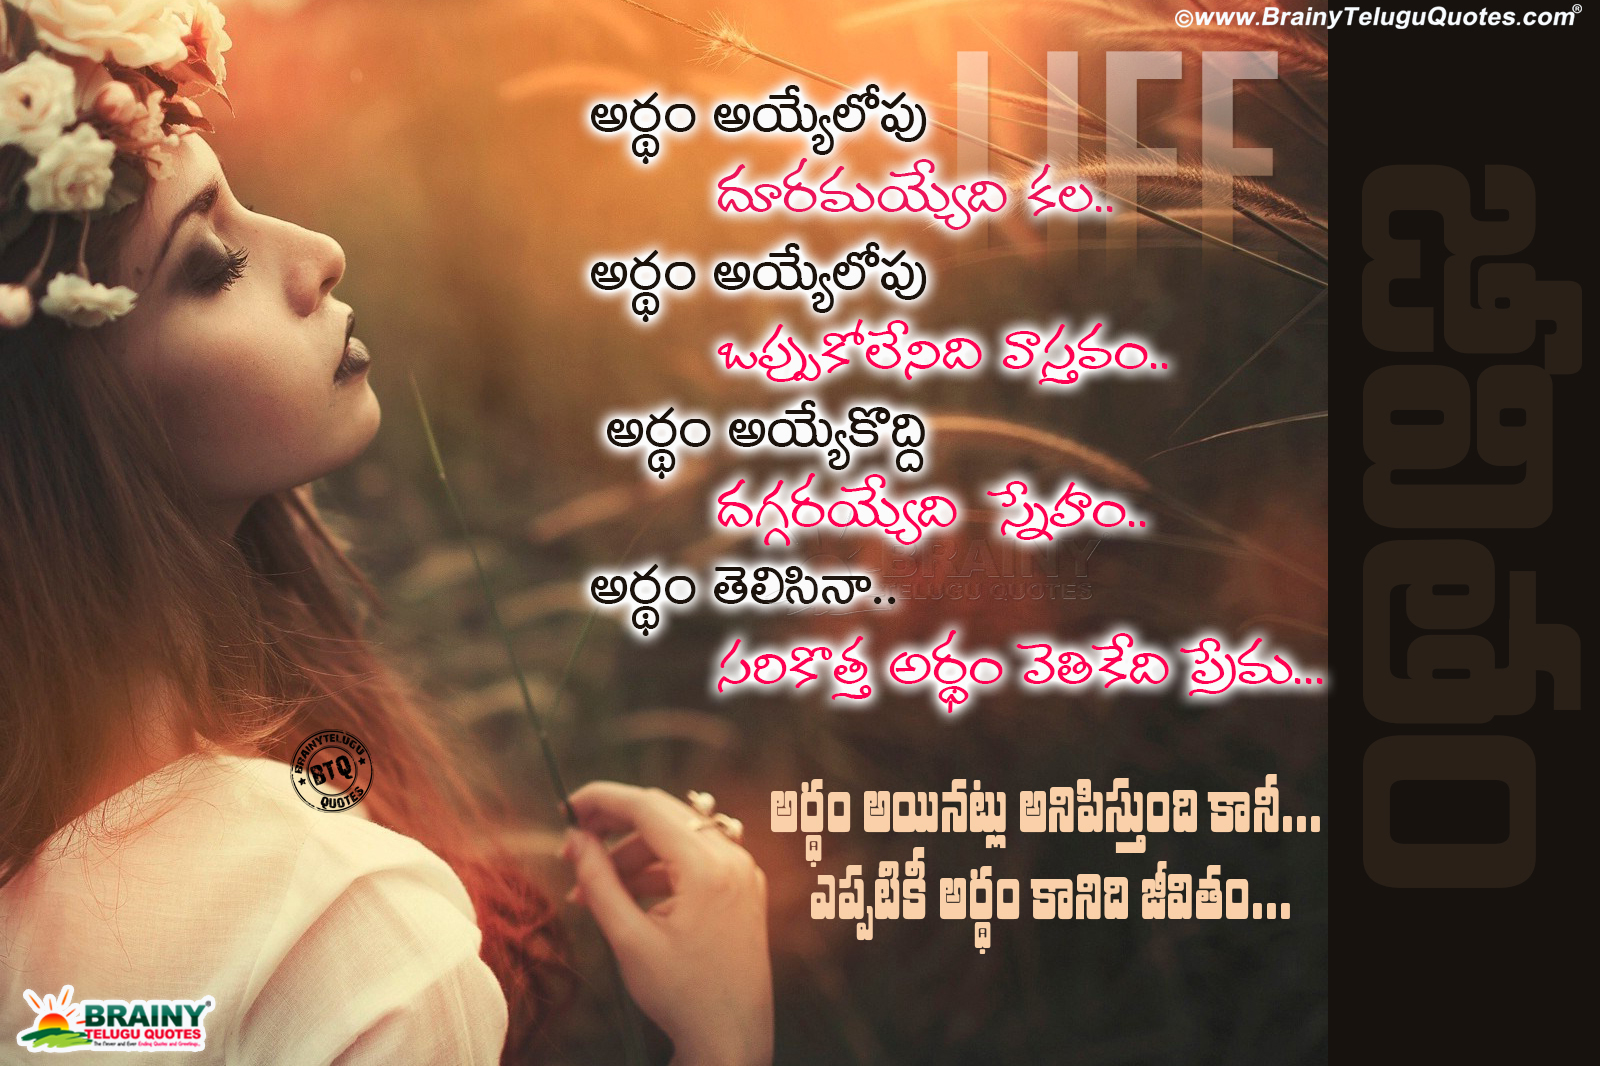 Best Meaning of Life Quotes Messages in Telugu-Life Quotes in Telugu